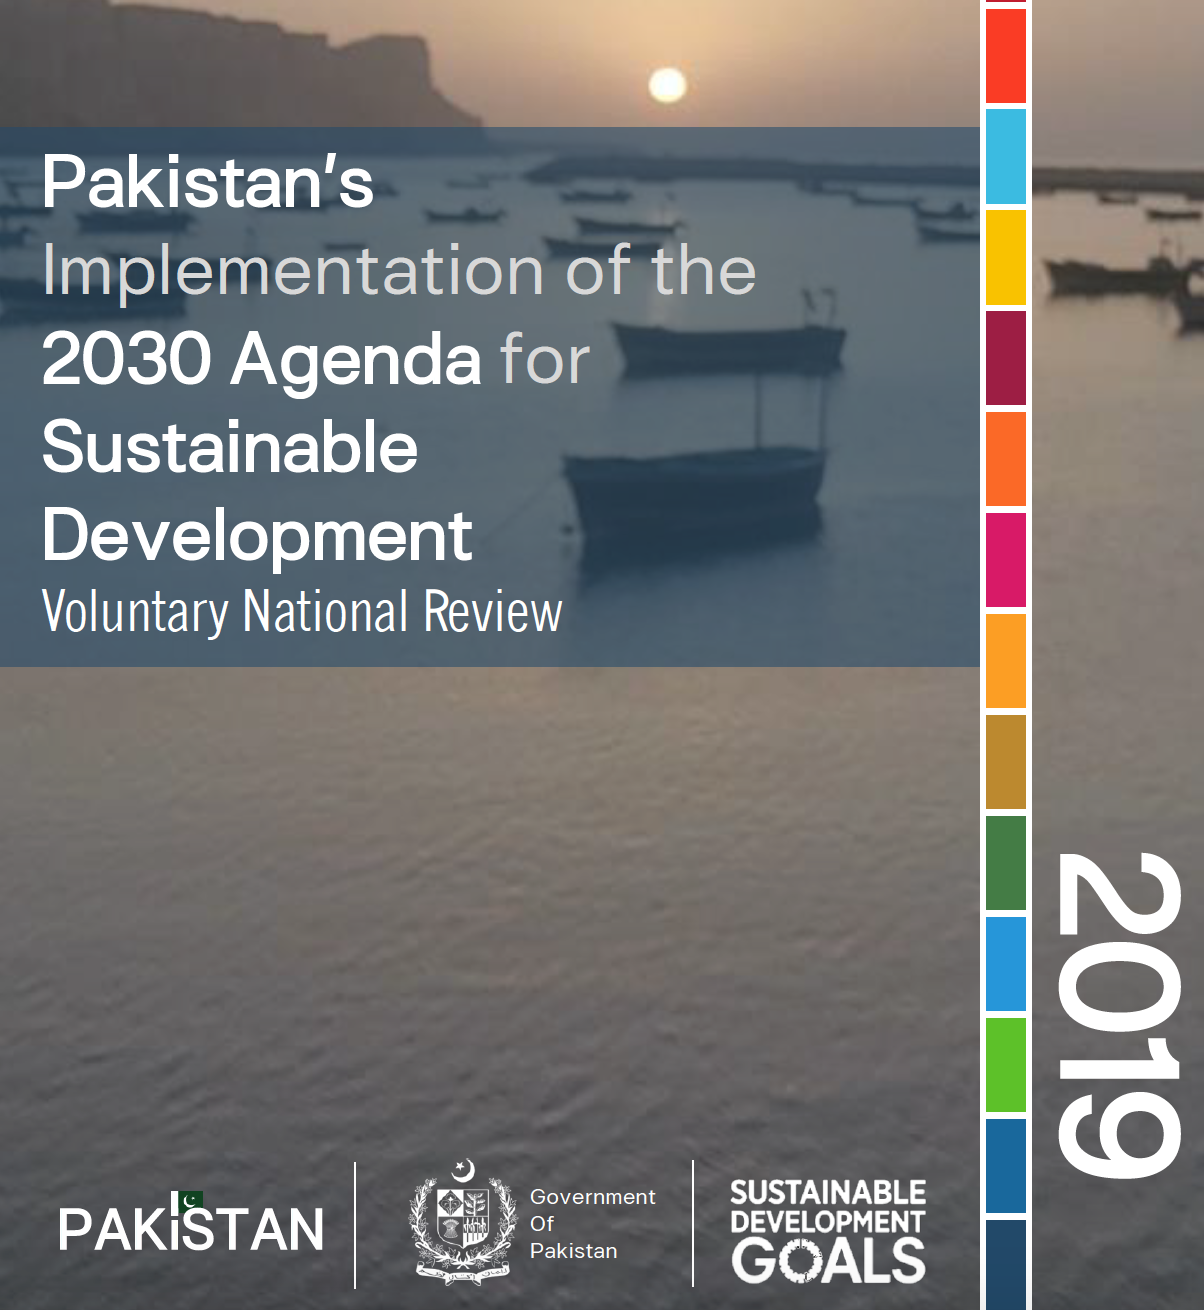 Q6. pakistan has affirmed its commitment to the 2030 agenda of sustainable development goals (sdgs) flow modestly is pakistan’s progress on sdgs and what are the challenges that pakistan faces in realizing these goals? 2023